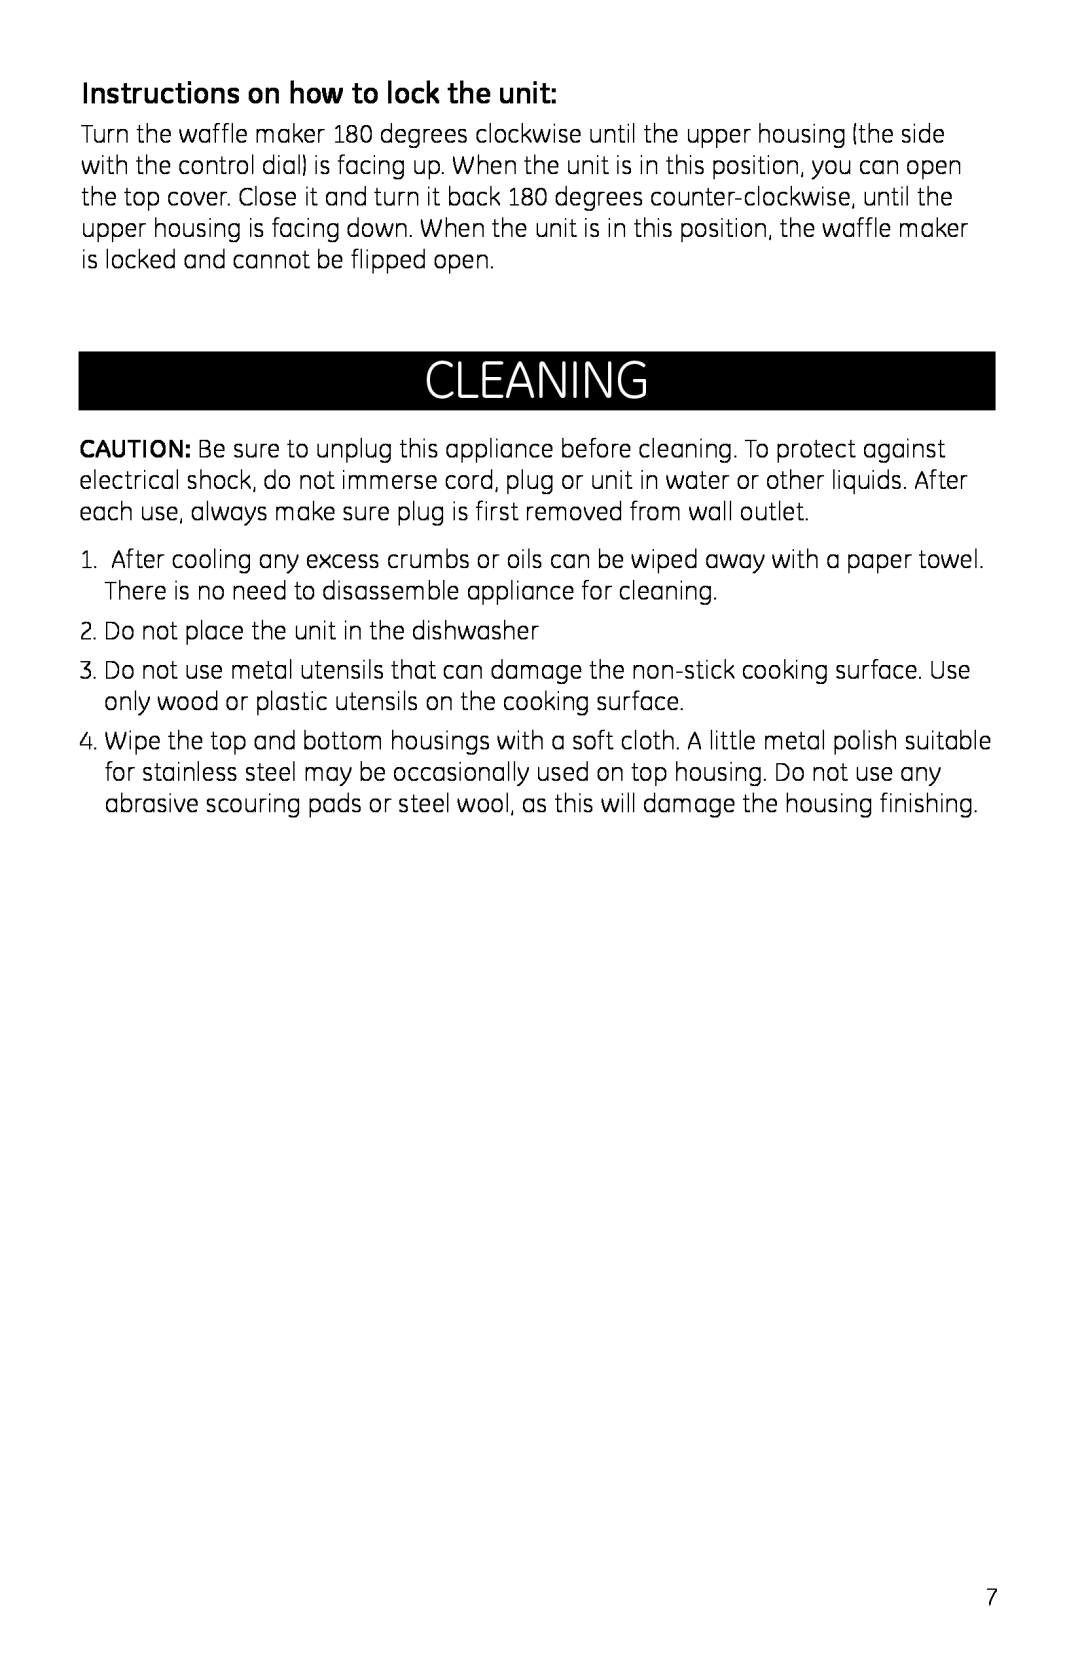 GE 681131691185 manual Cleaning, Instructions on how to lock the unit 